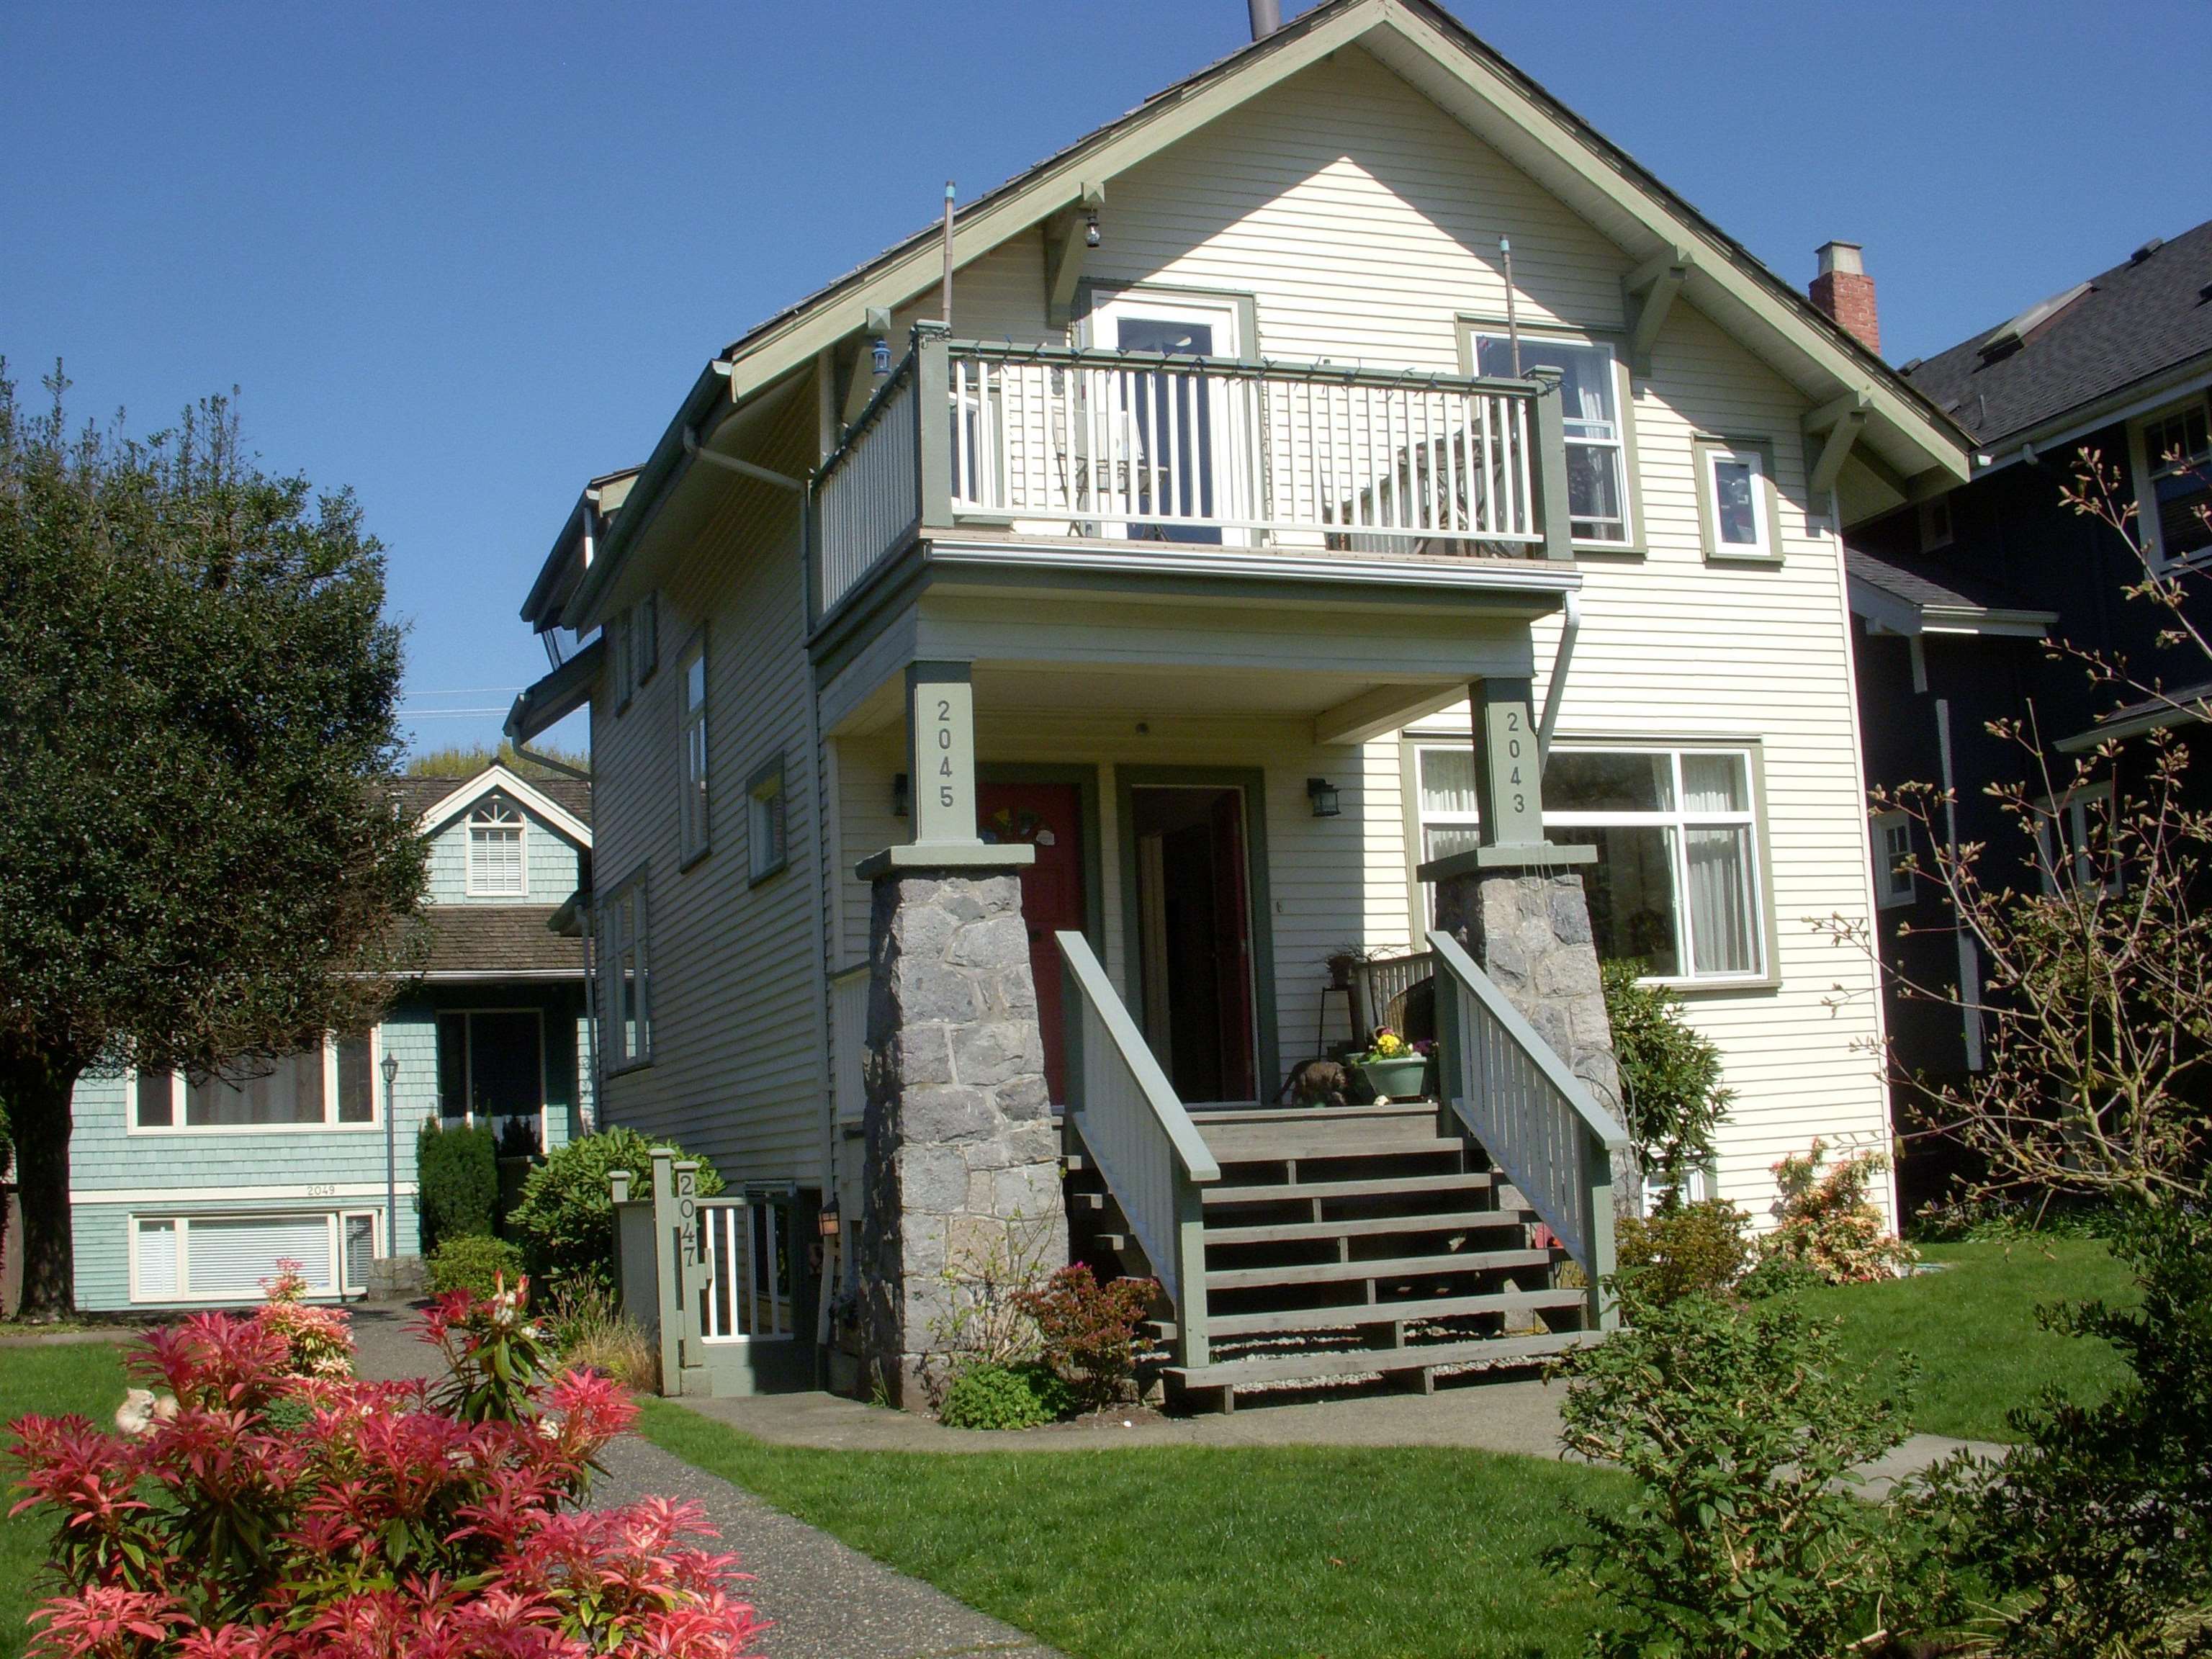 Kitsilano House/Single Family for sale:  5 bedroom 2,696 sq.ft. (Listed 2022-04-07)